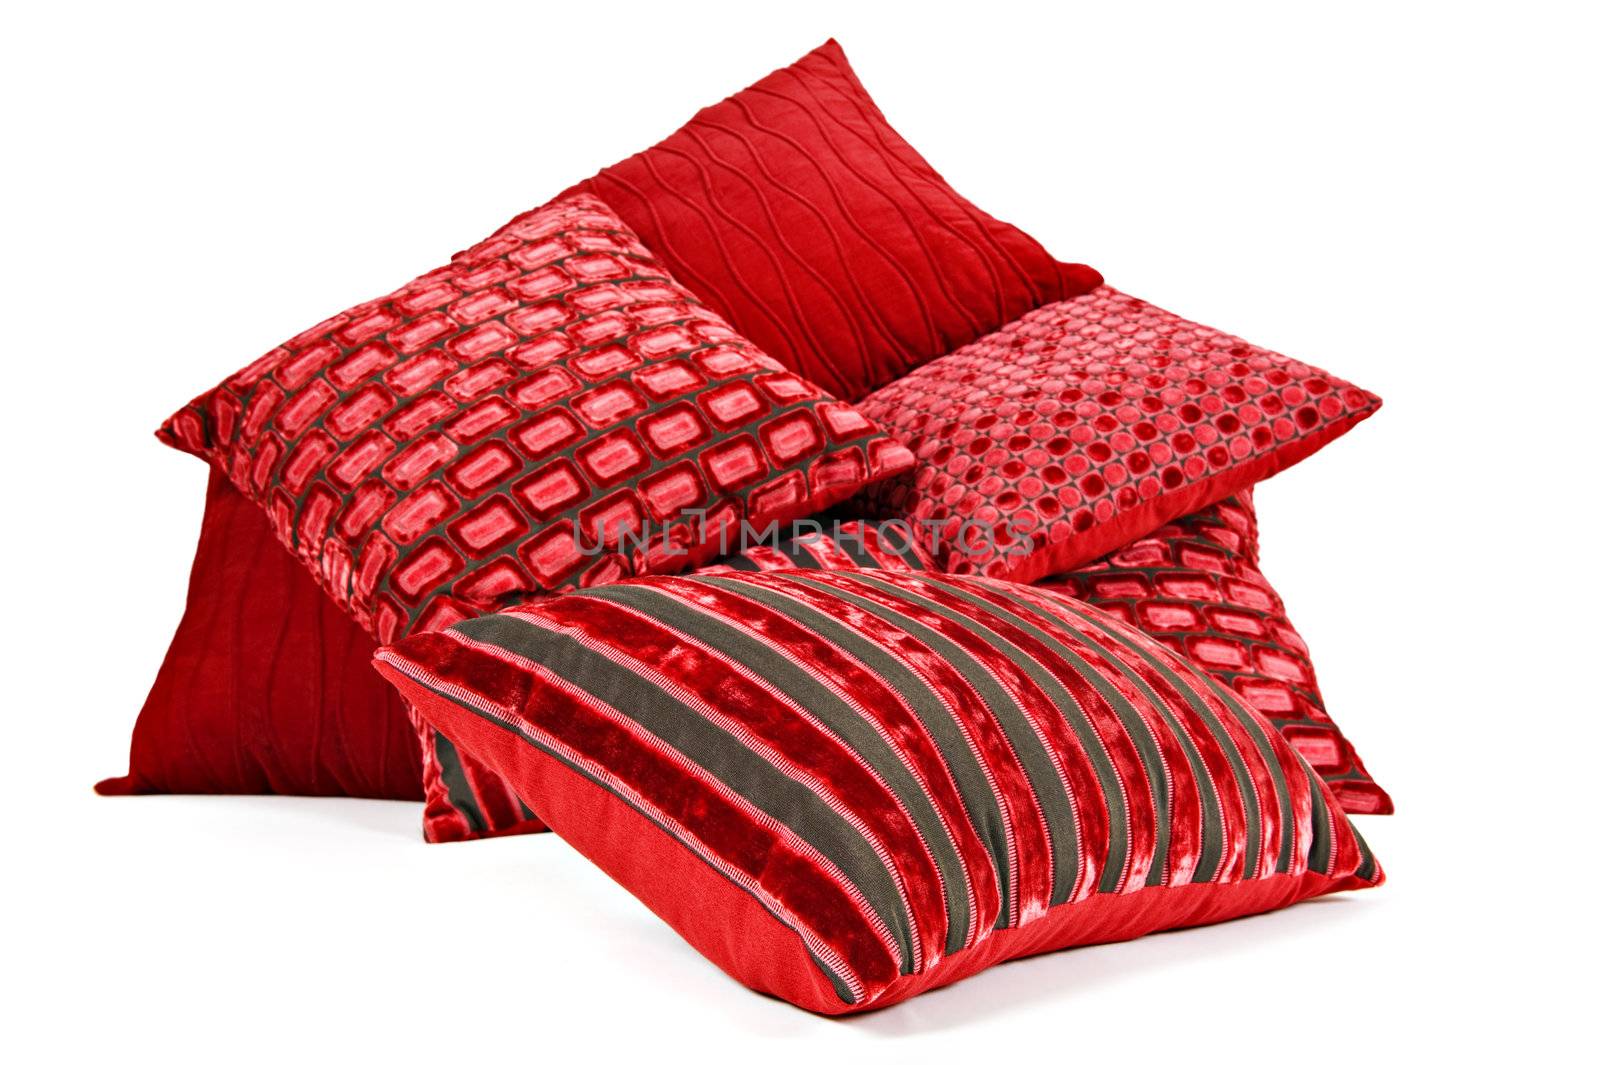 Red cushions stacked up on a white background by tish1